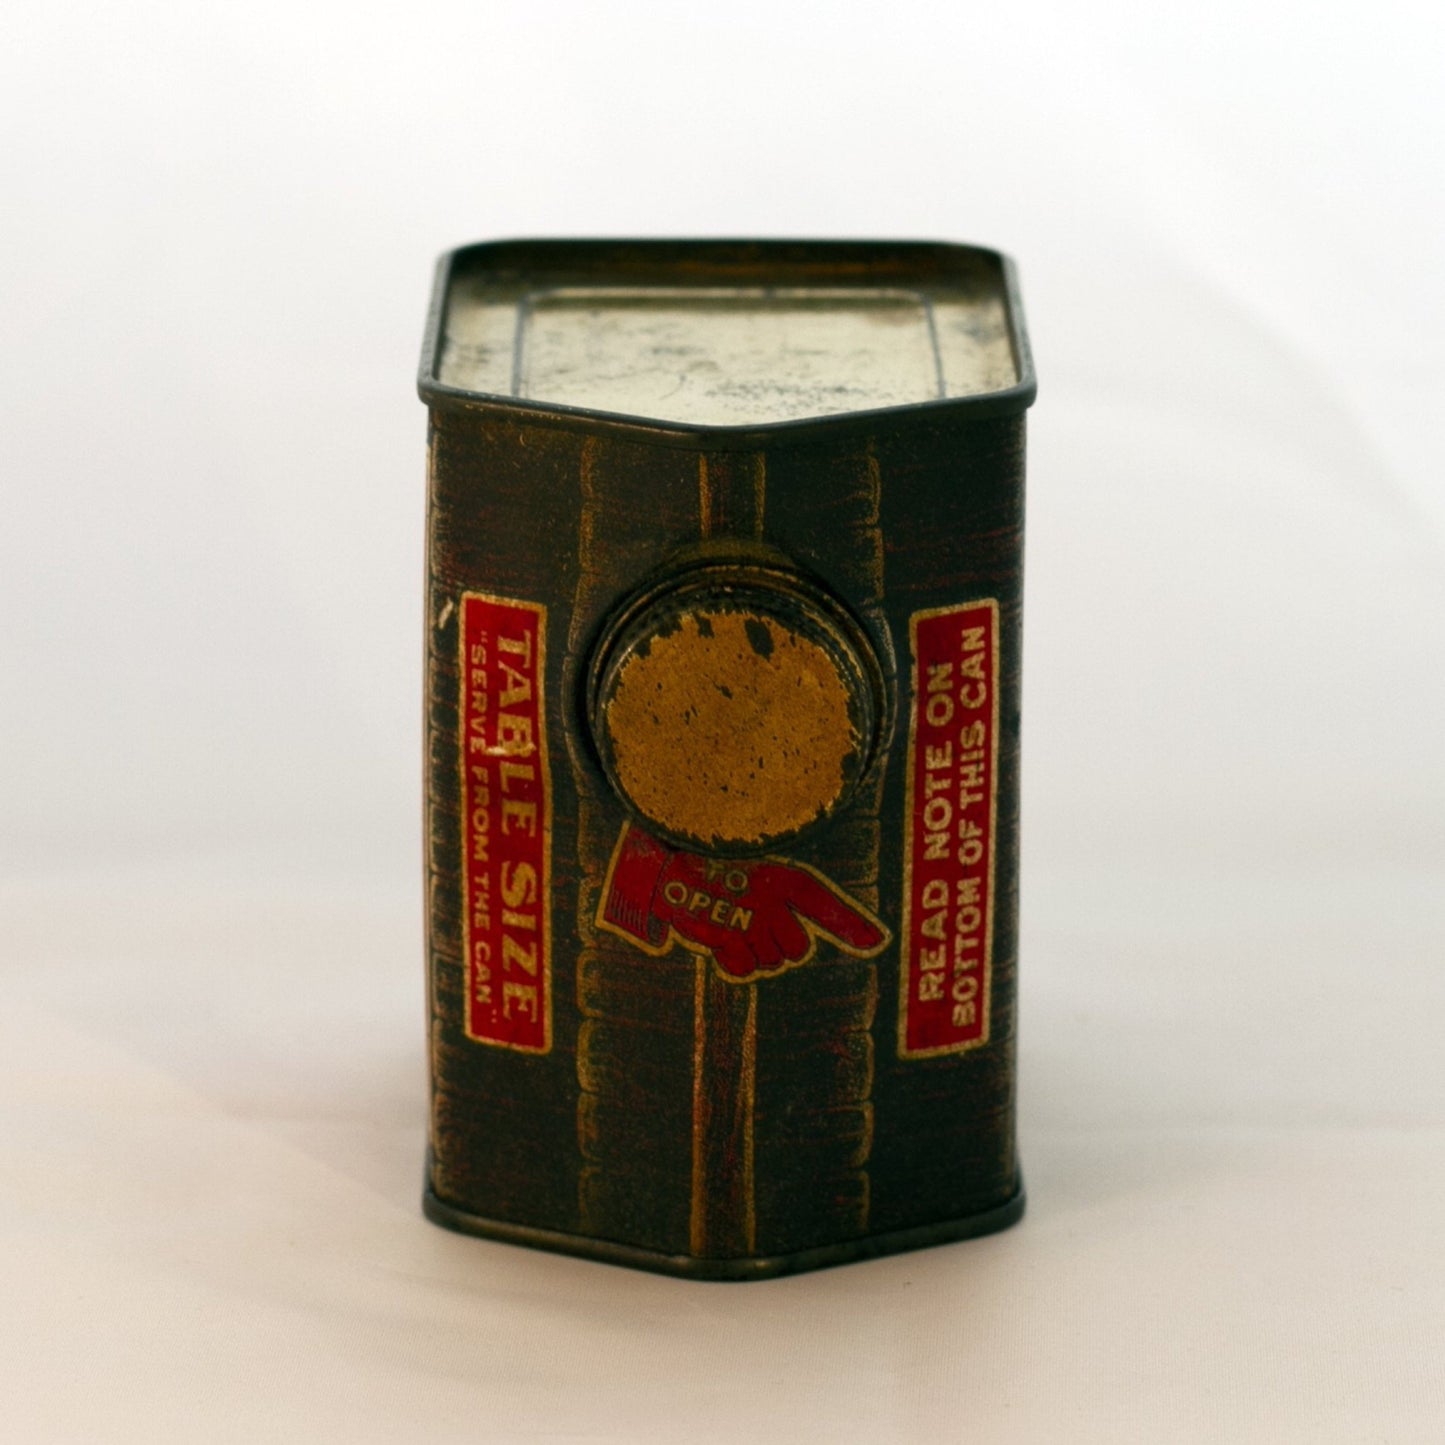 Antique TOWLE’S LOG CABIN SYRUP TIN Copyright 1914 "Boy in Doorway" Jack Towle 12-Ounce Capacity